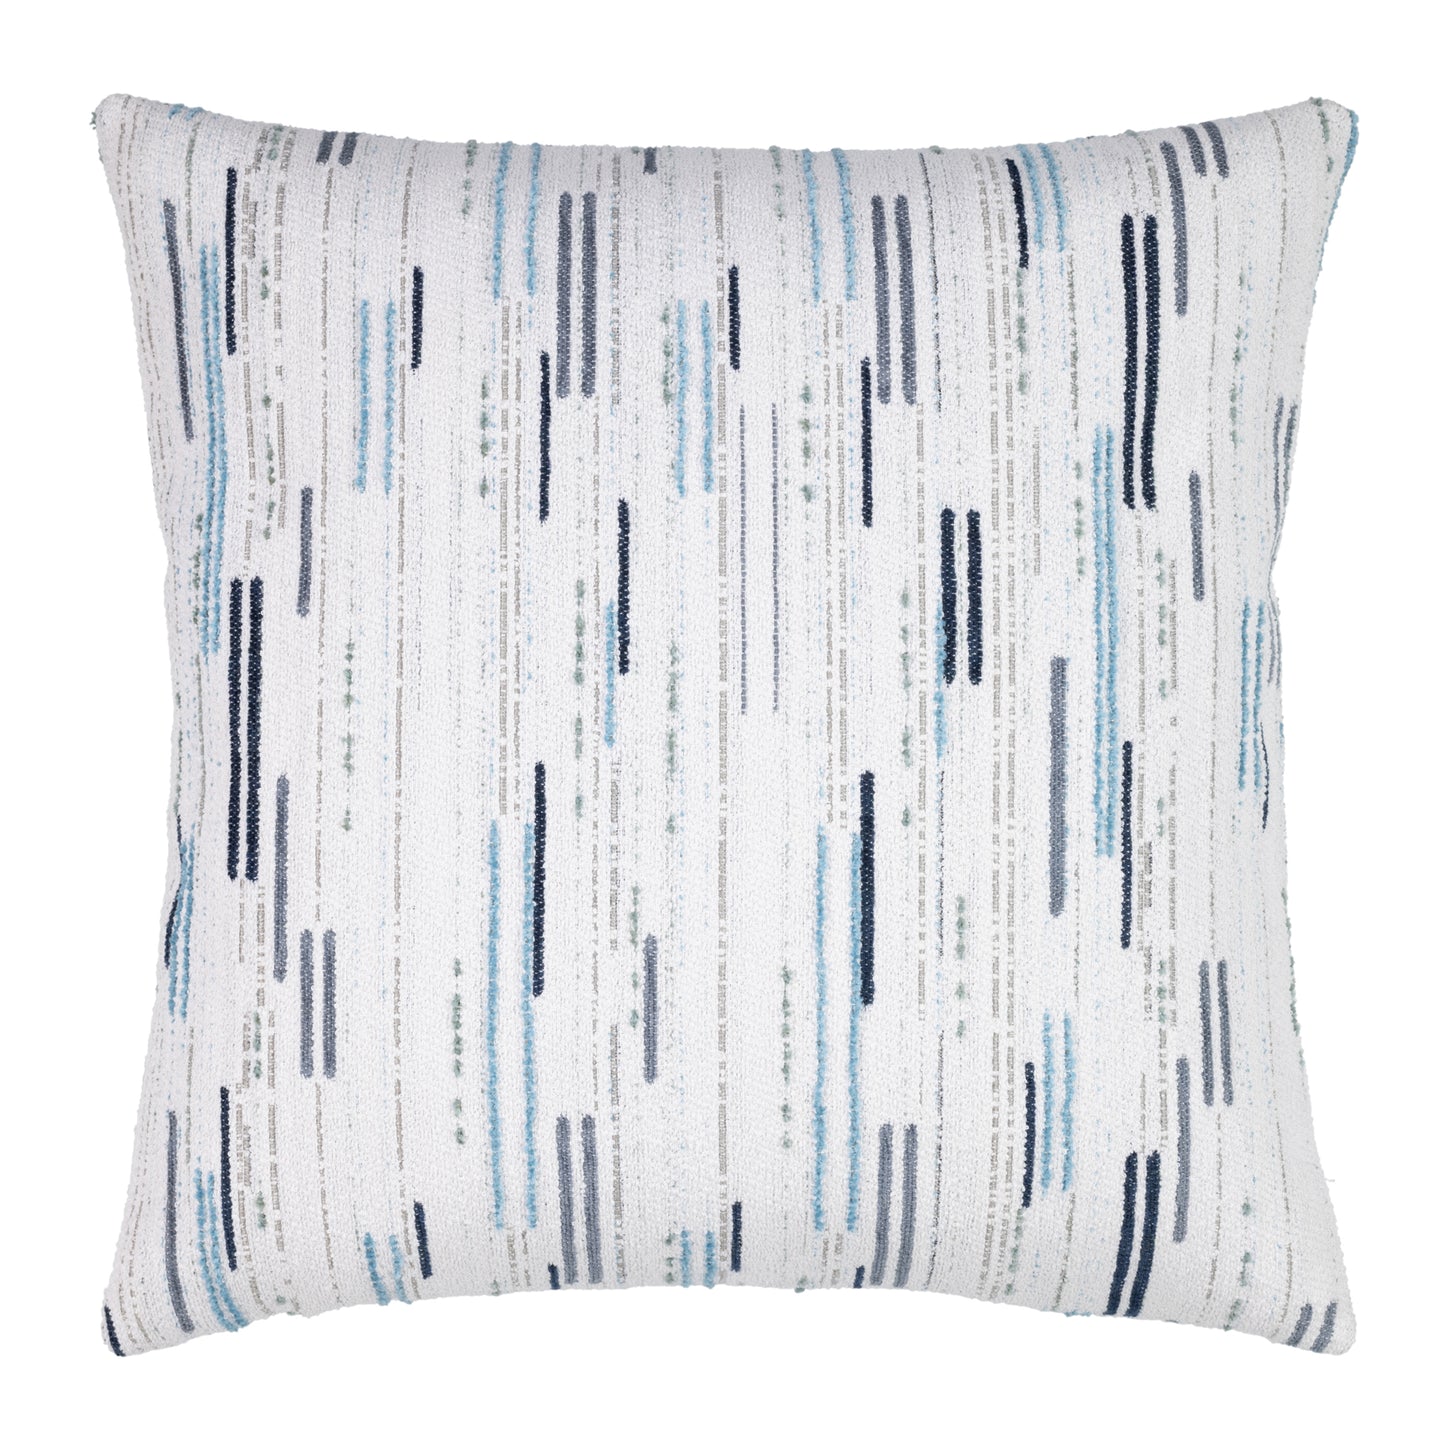 Elaine Smith 22 Square Pillow Connection Ocean, image 1